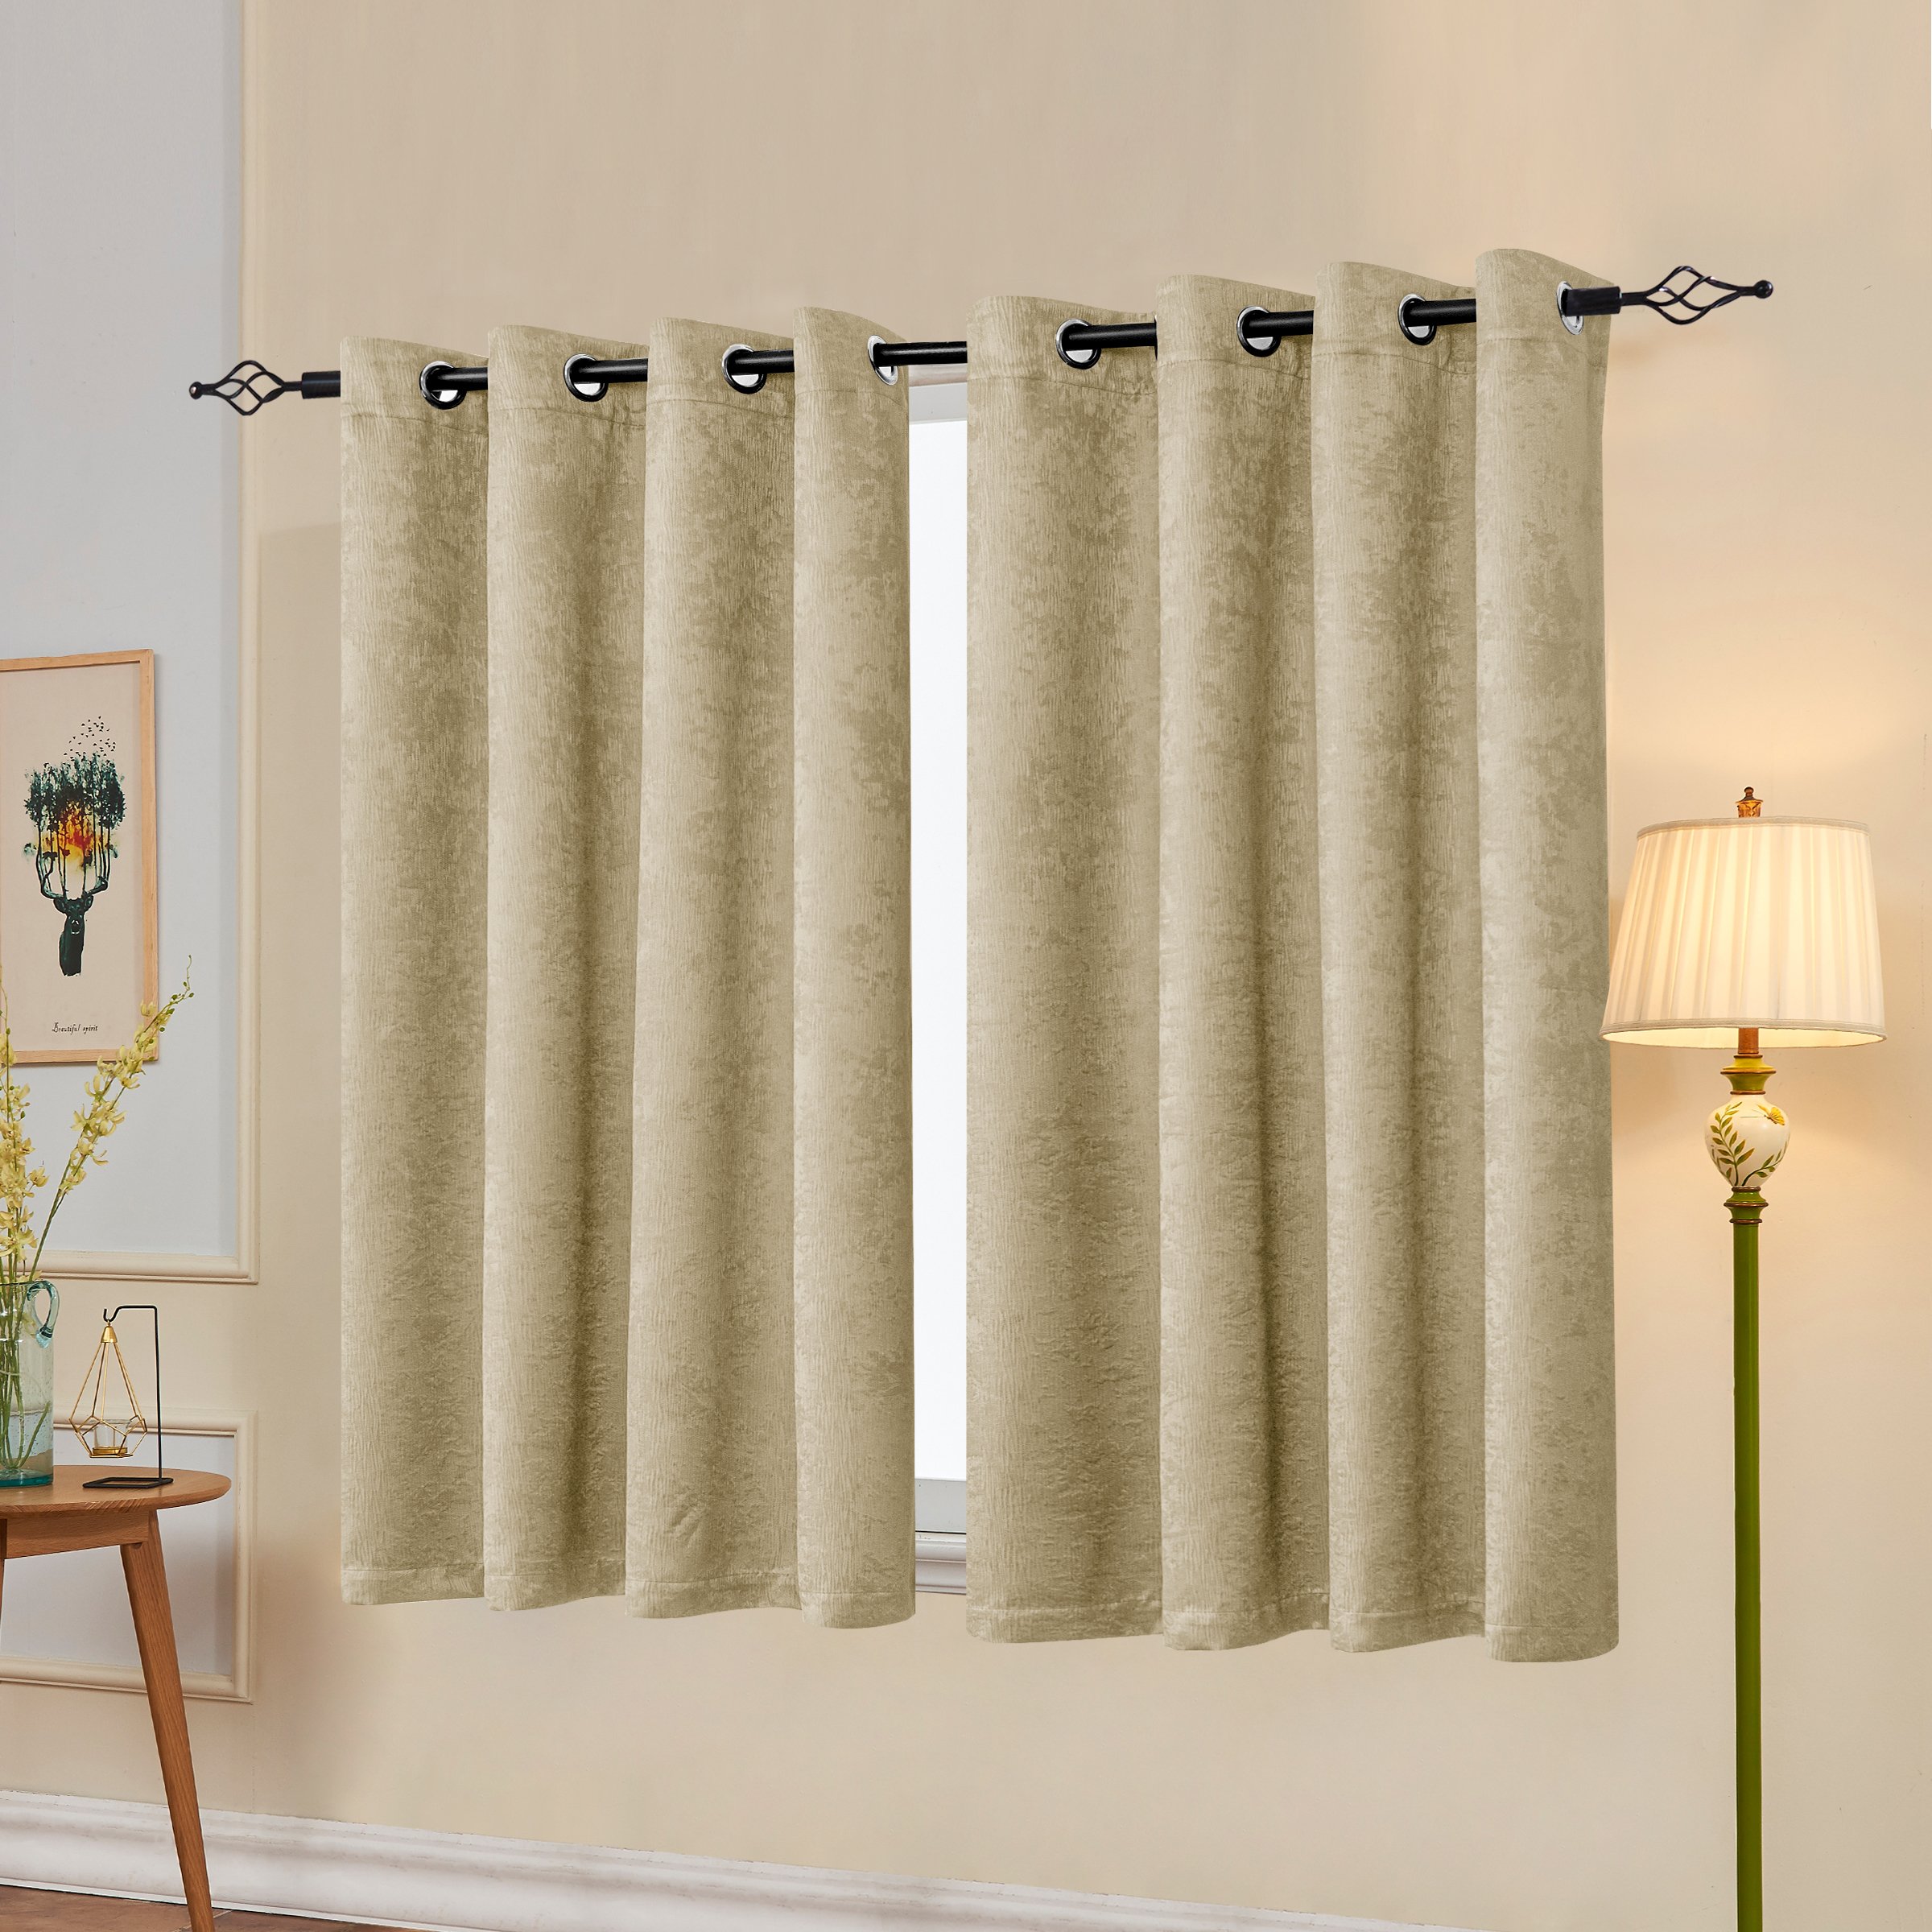 Subrtex Thermal Insulated Grommet Blackout Curtains for Bedroom, Set of 2 Panels, 53"×63", Beige - image 5 of 5